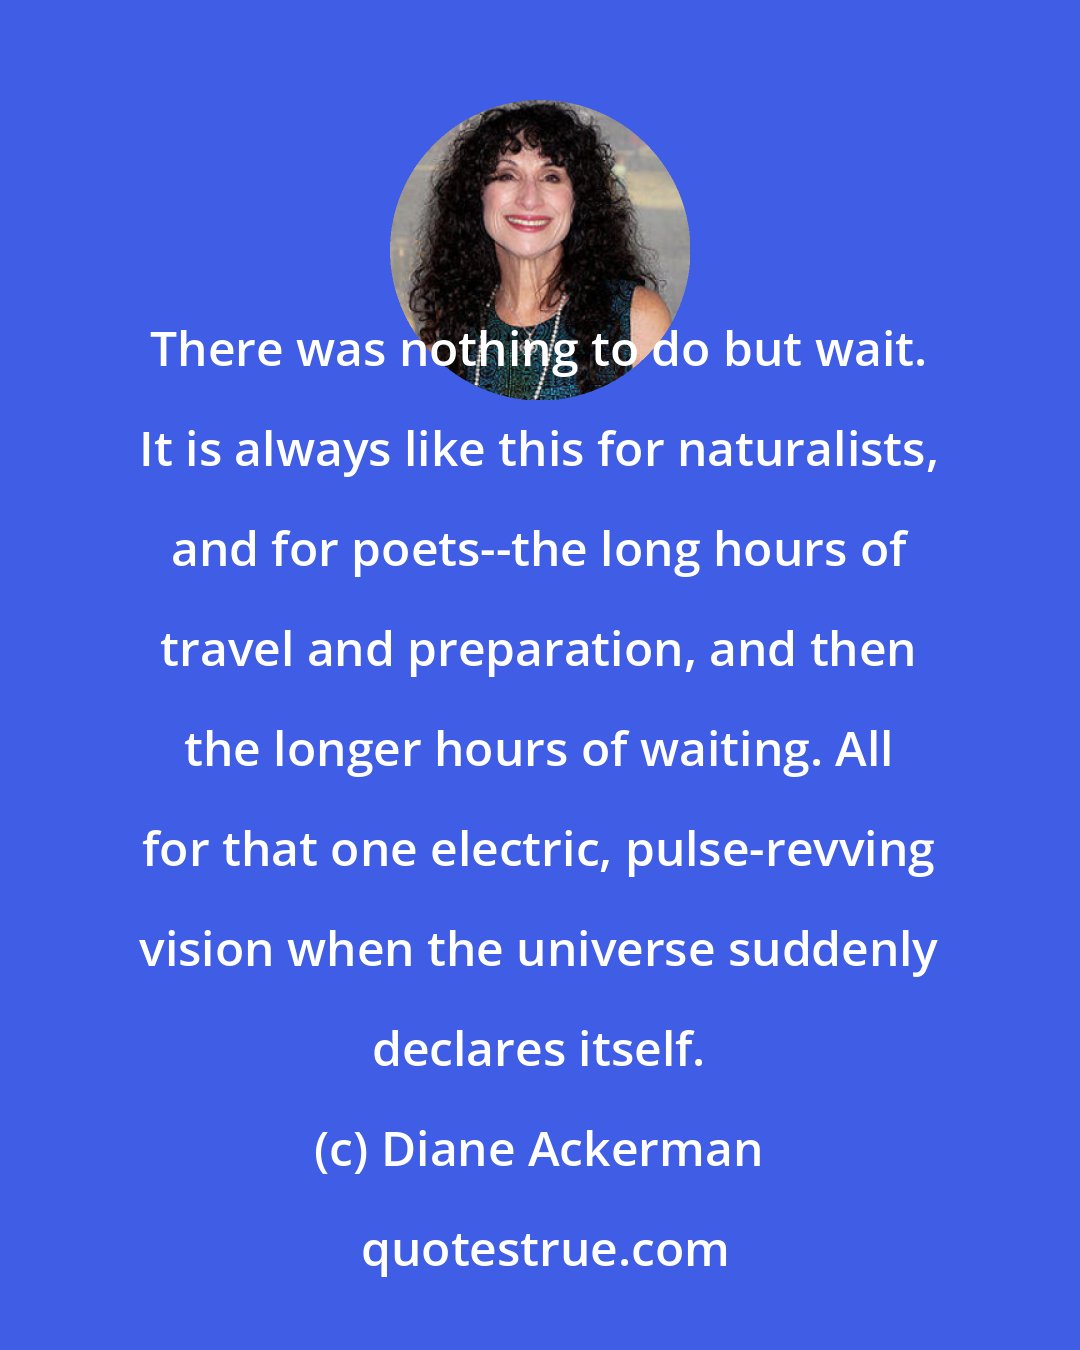 Diane Ackerman: There was nothing to do but wait. It is always like this for naturalists, and for poets--the long hours of travel and preparation, and then the longer hours of waiting. All for that one electric, pulse-revving vision when the universe suddenly declares itself.